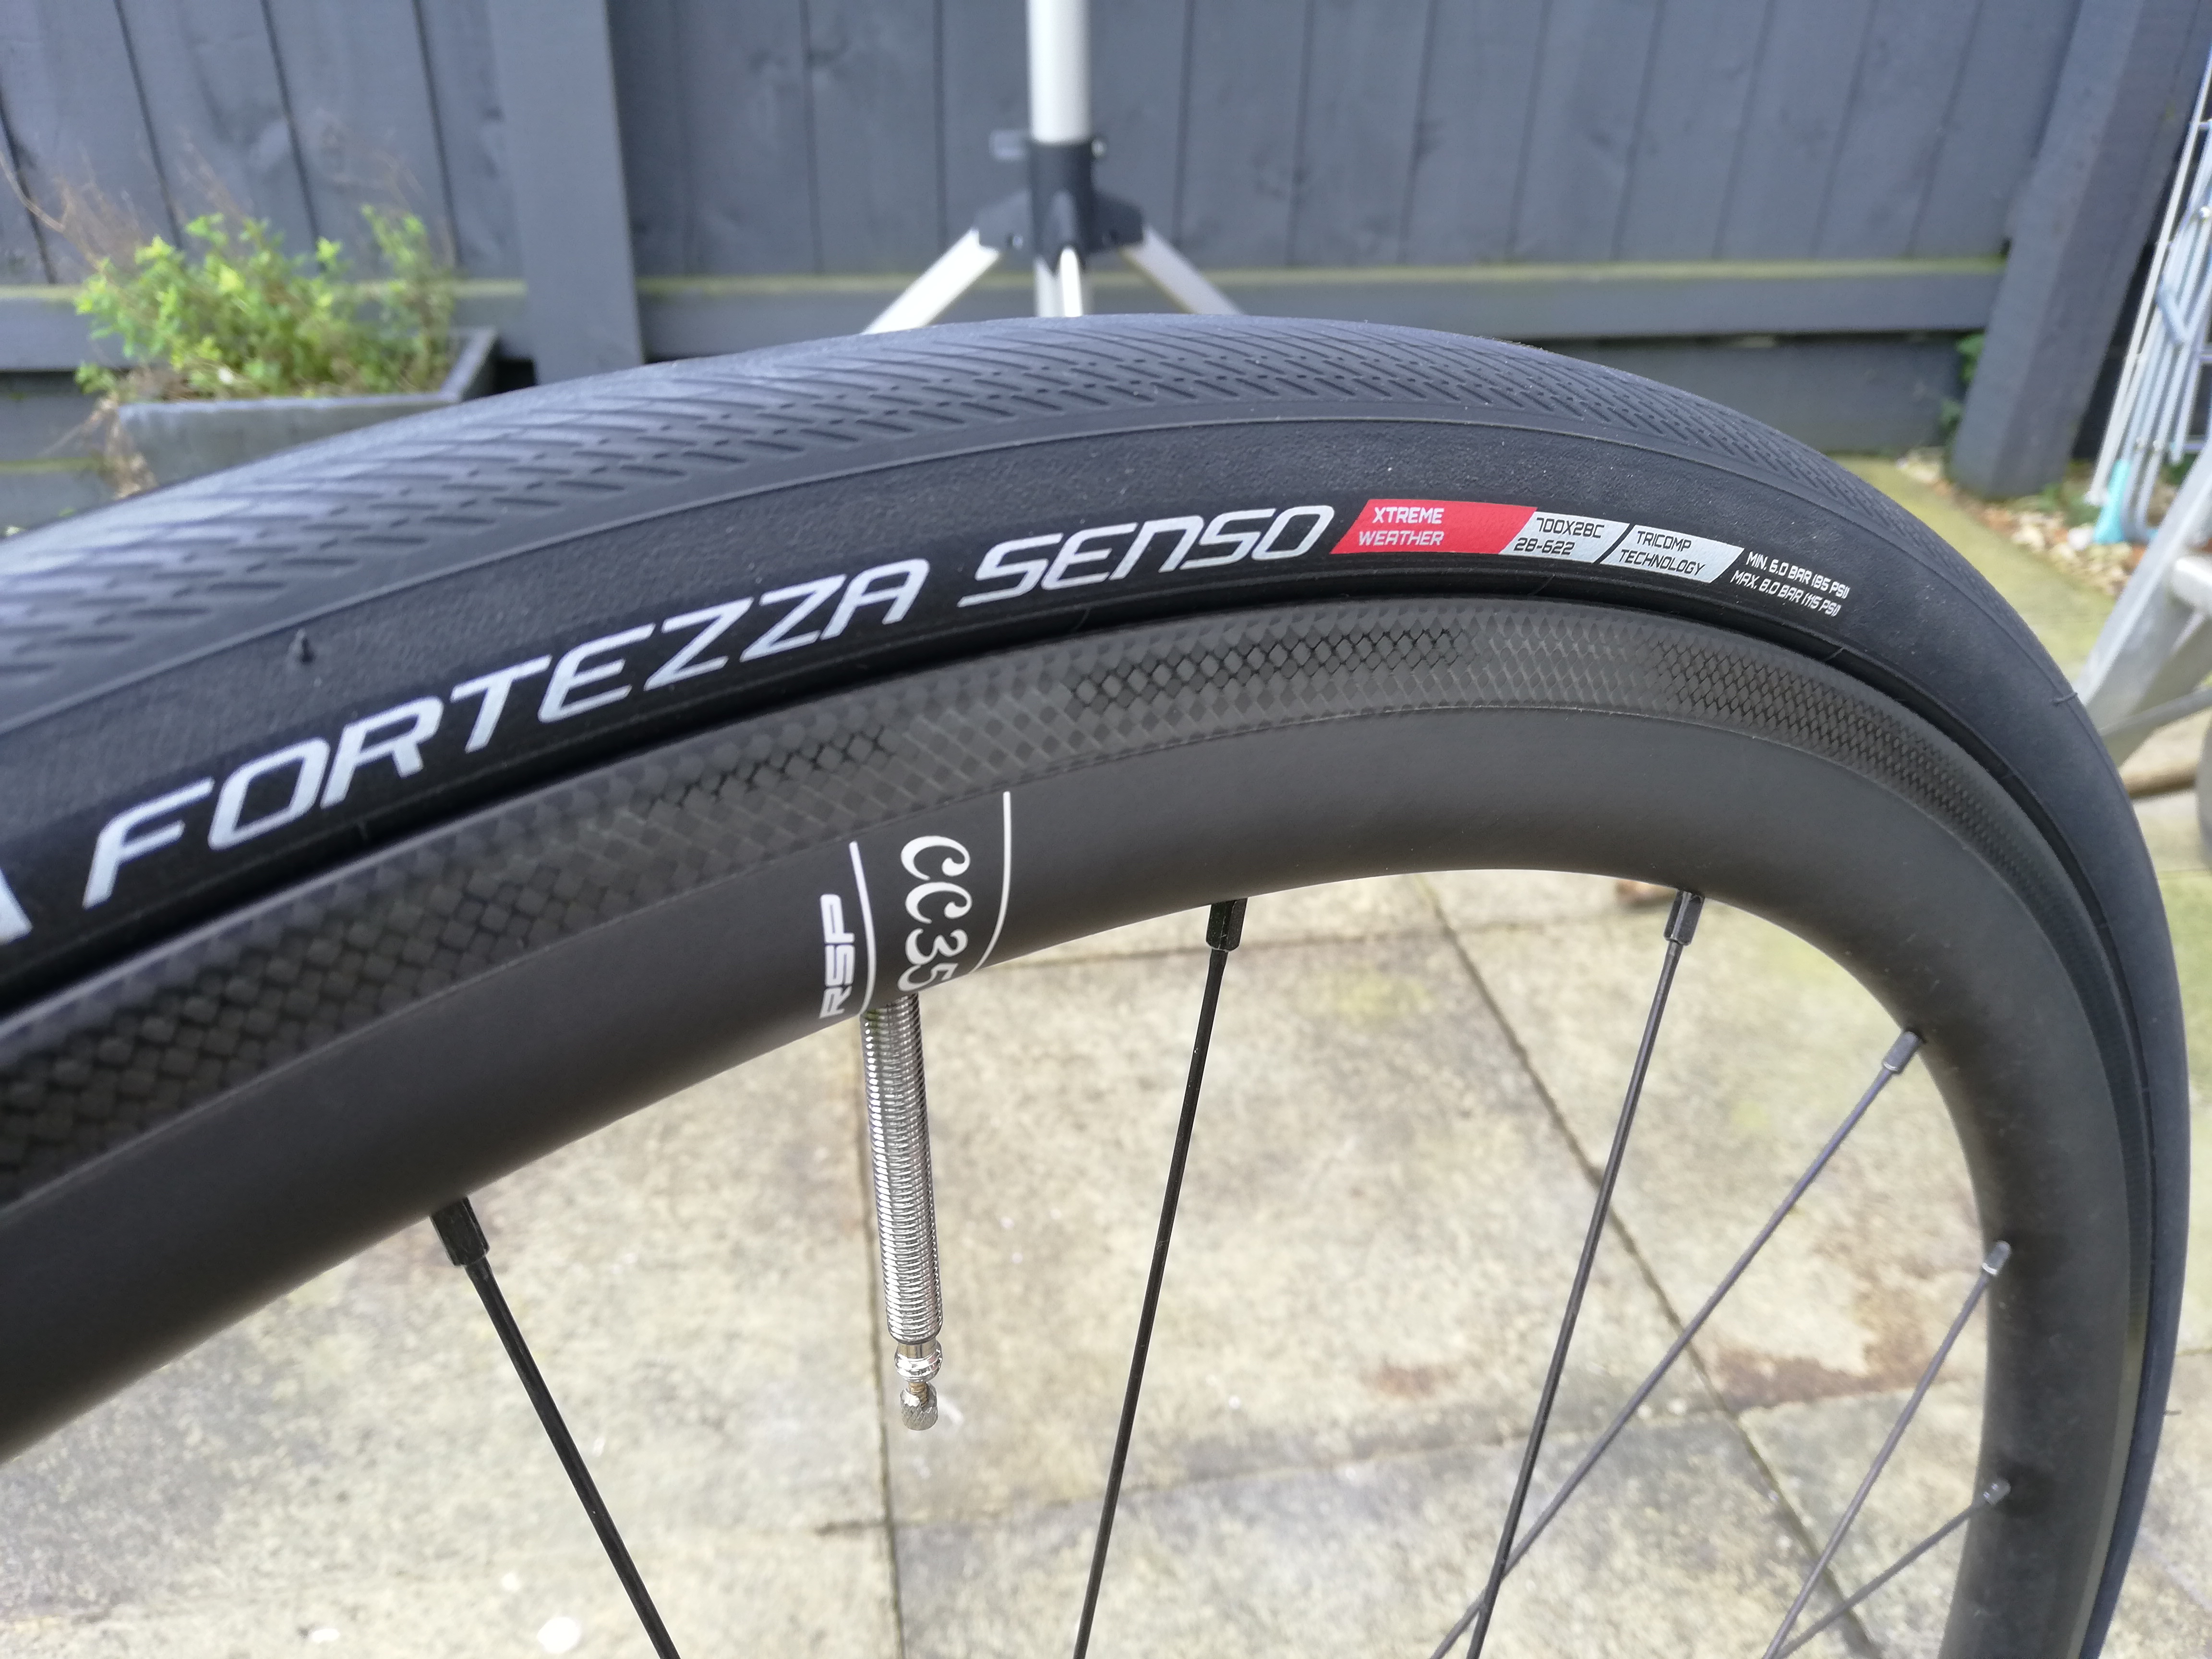 vredestein bicycle tires